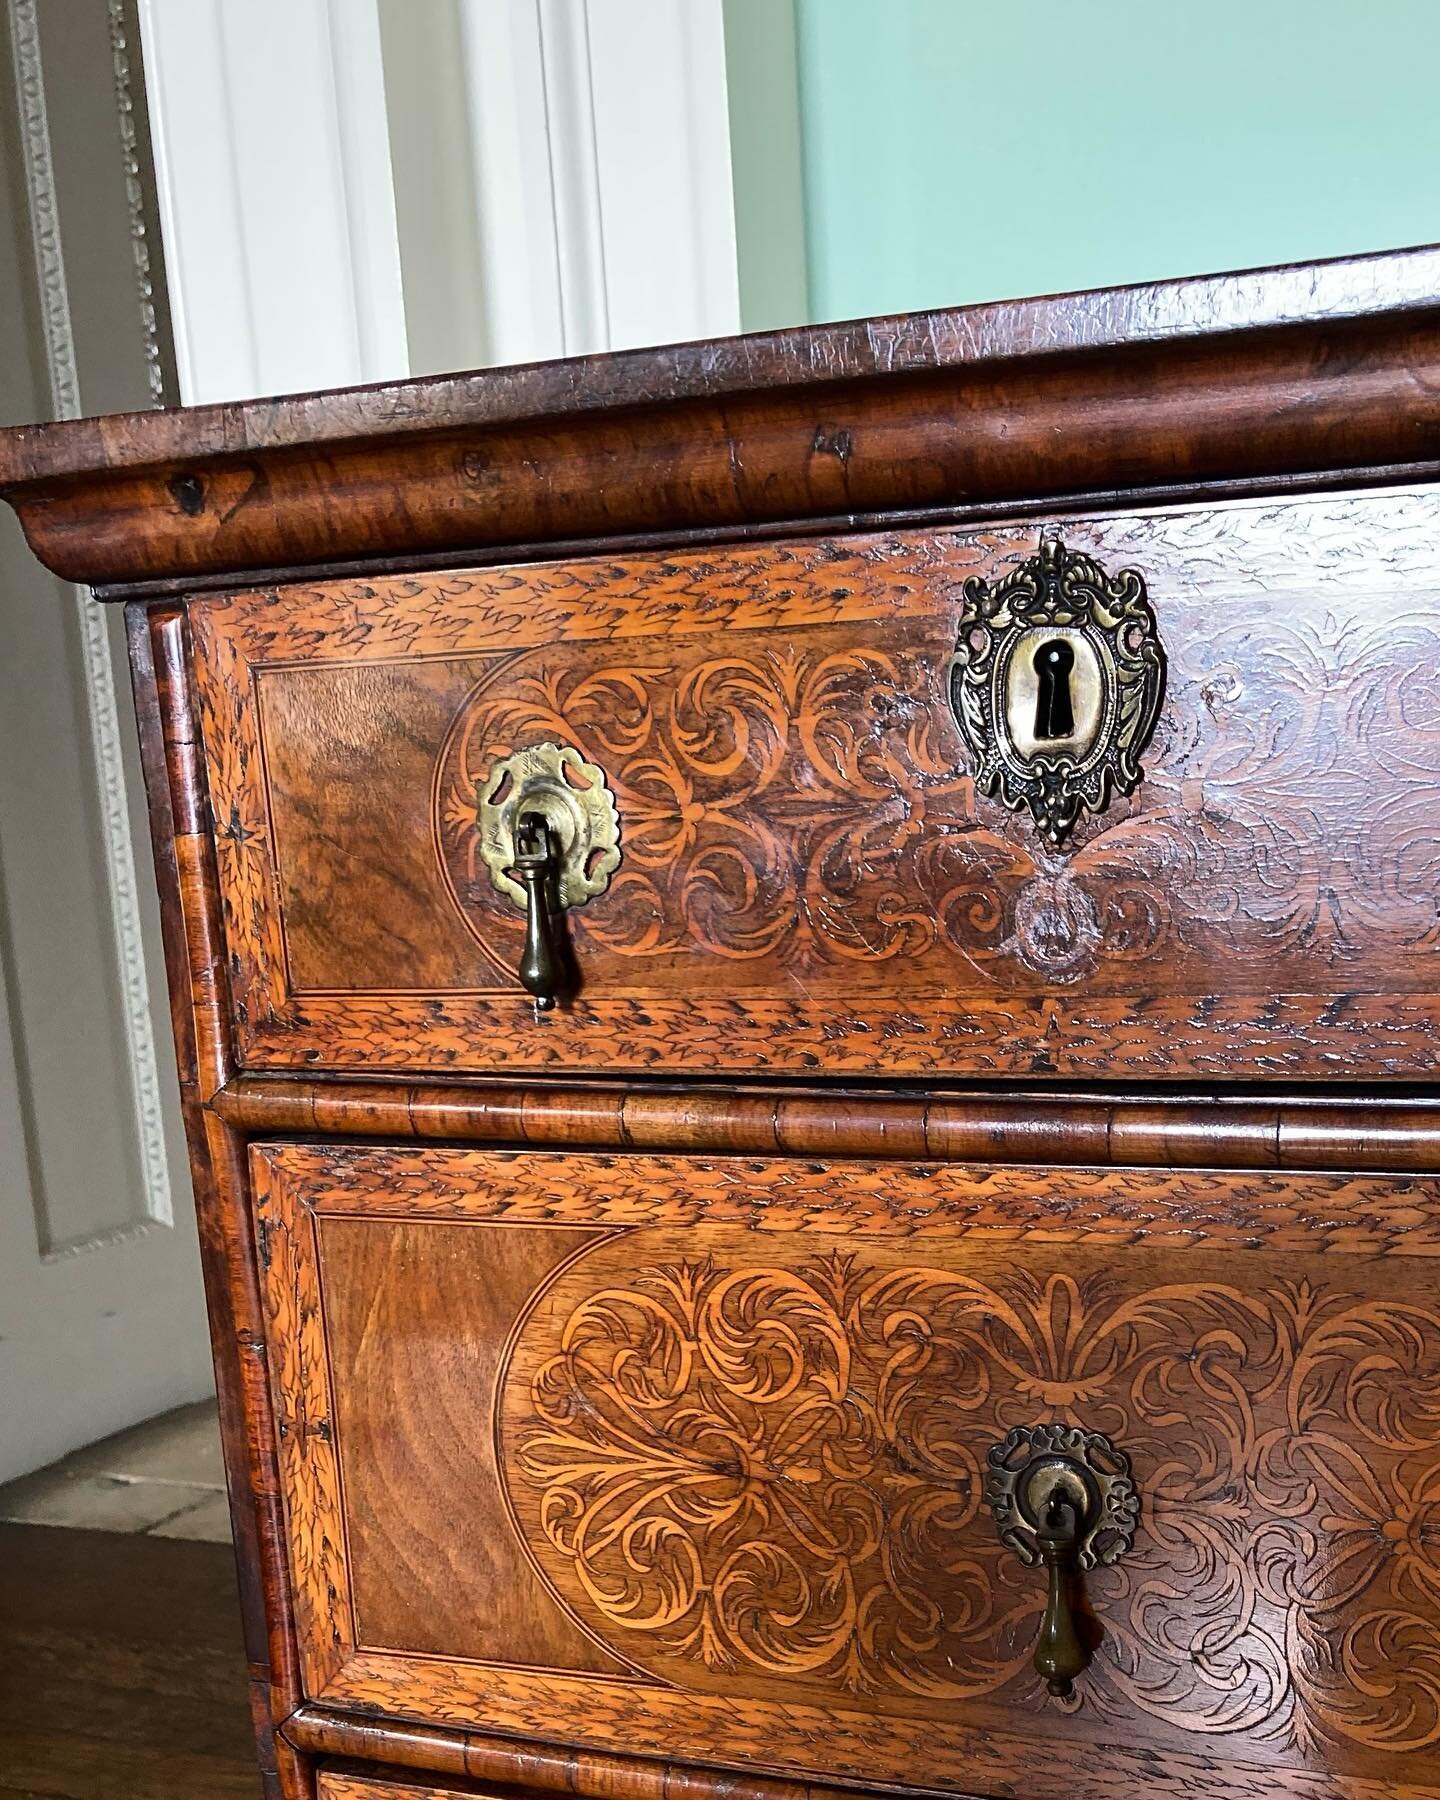 Stunning seaweed marquetry on this 17th century chest of drawers, lot 72 on sale @dreweatts1759 next week, shown off perfectly on view @kirtlingtonpark